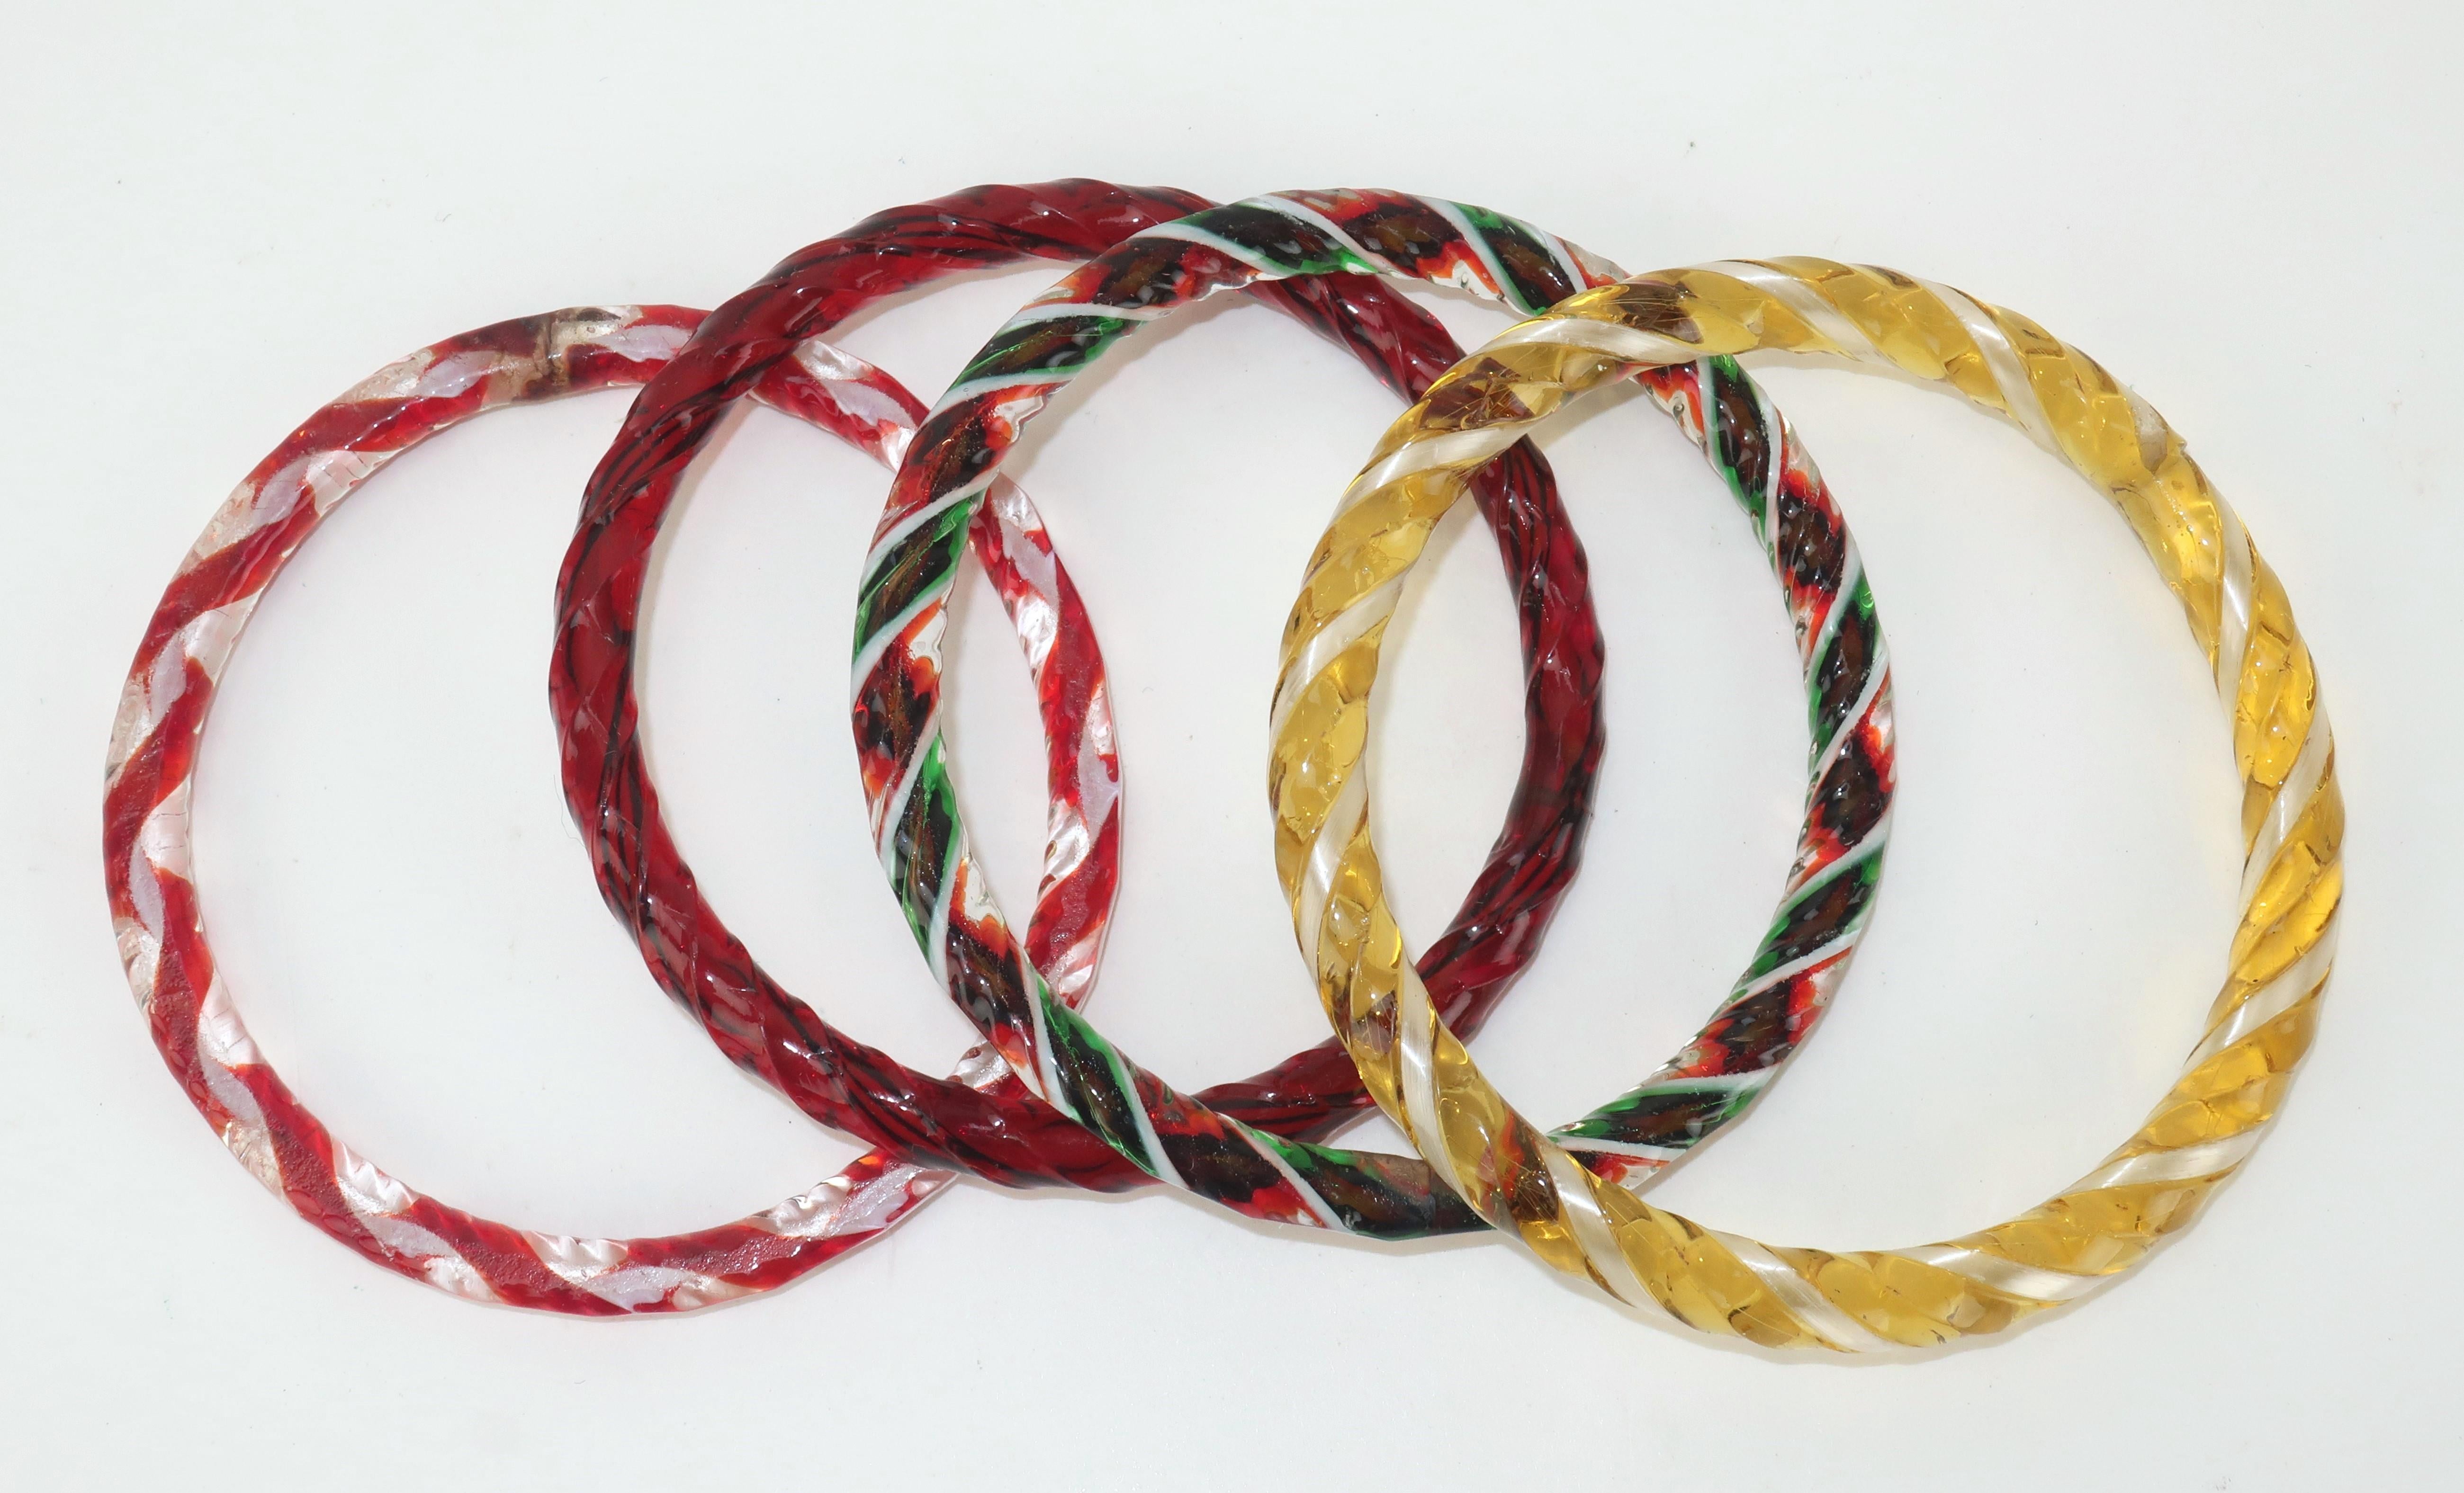 Set of 4 vintage Murano style glass bangle bracelets in candy cane colors including red, yellow, green and white.  Each bracelet has a twisted surface and a translucent look.  They create a charming sound when worn together akin to jingle bells. 